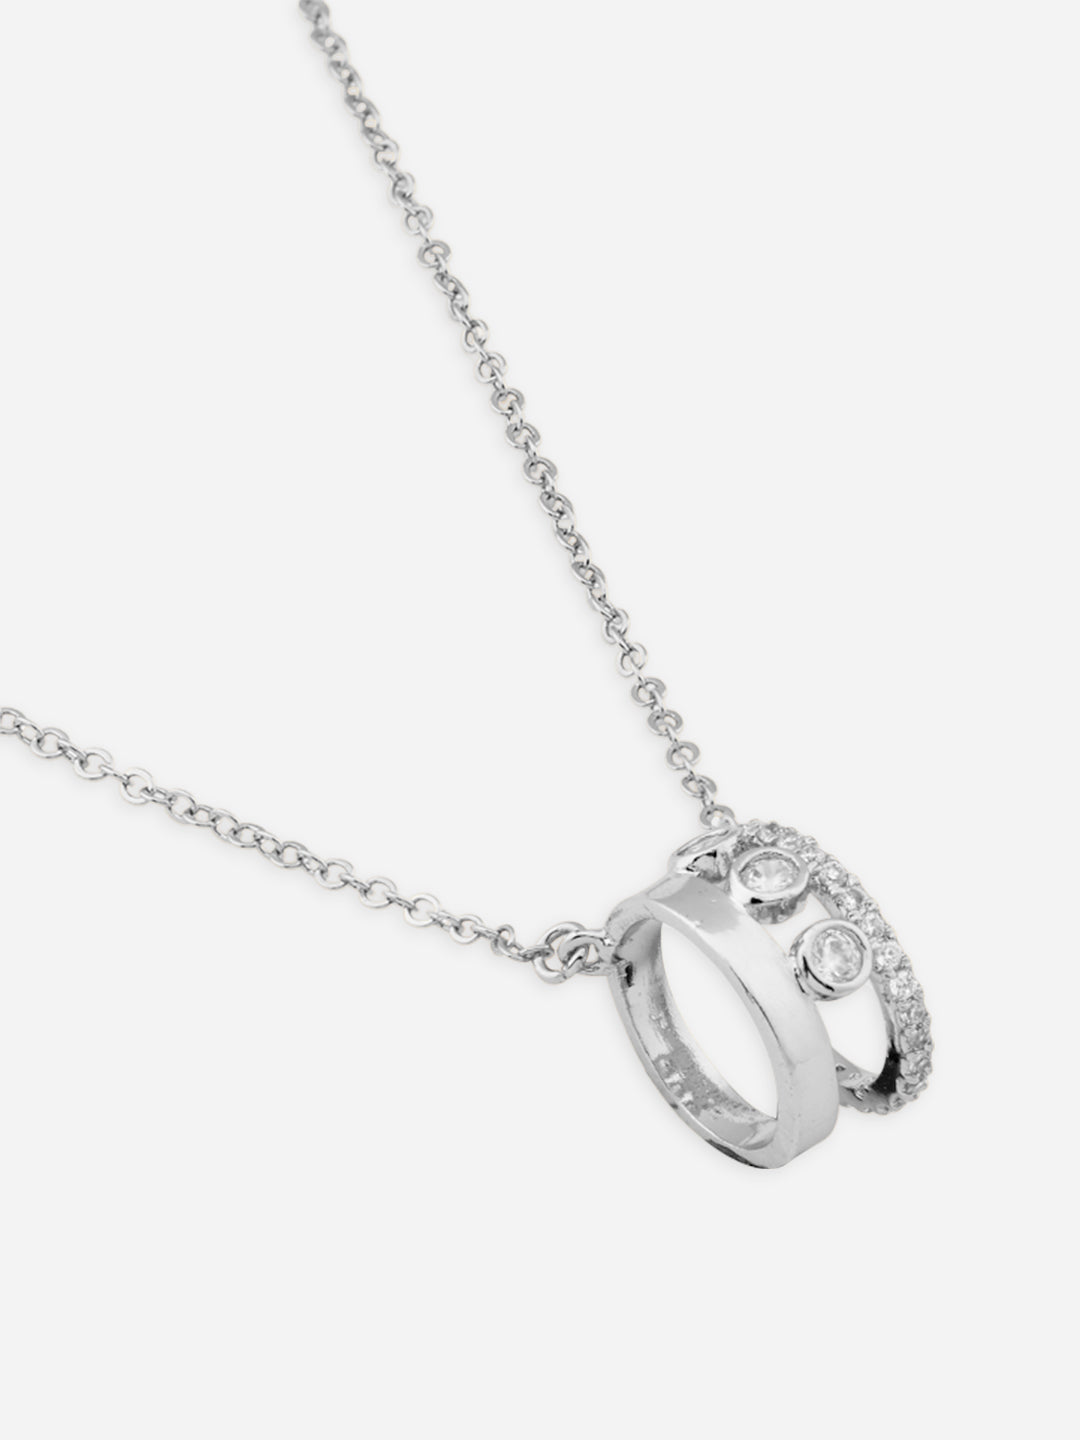 Womens White Gold Plated Toned Ring Pendant Necklace.